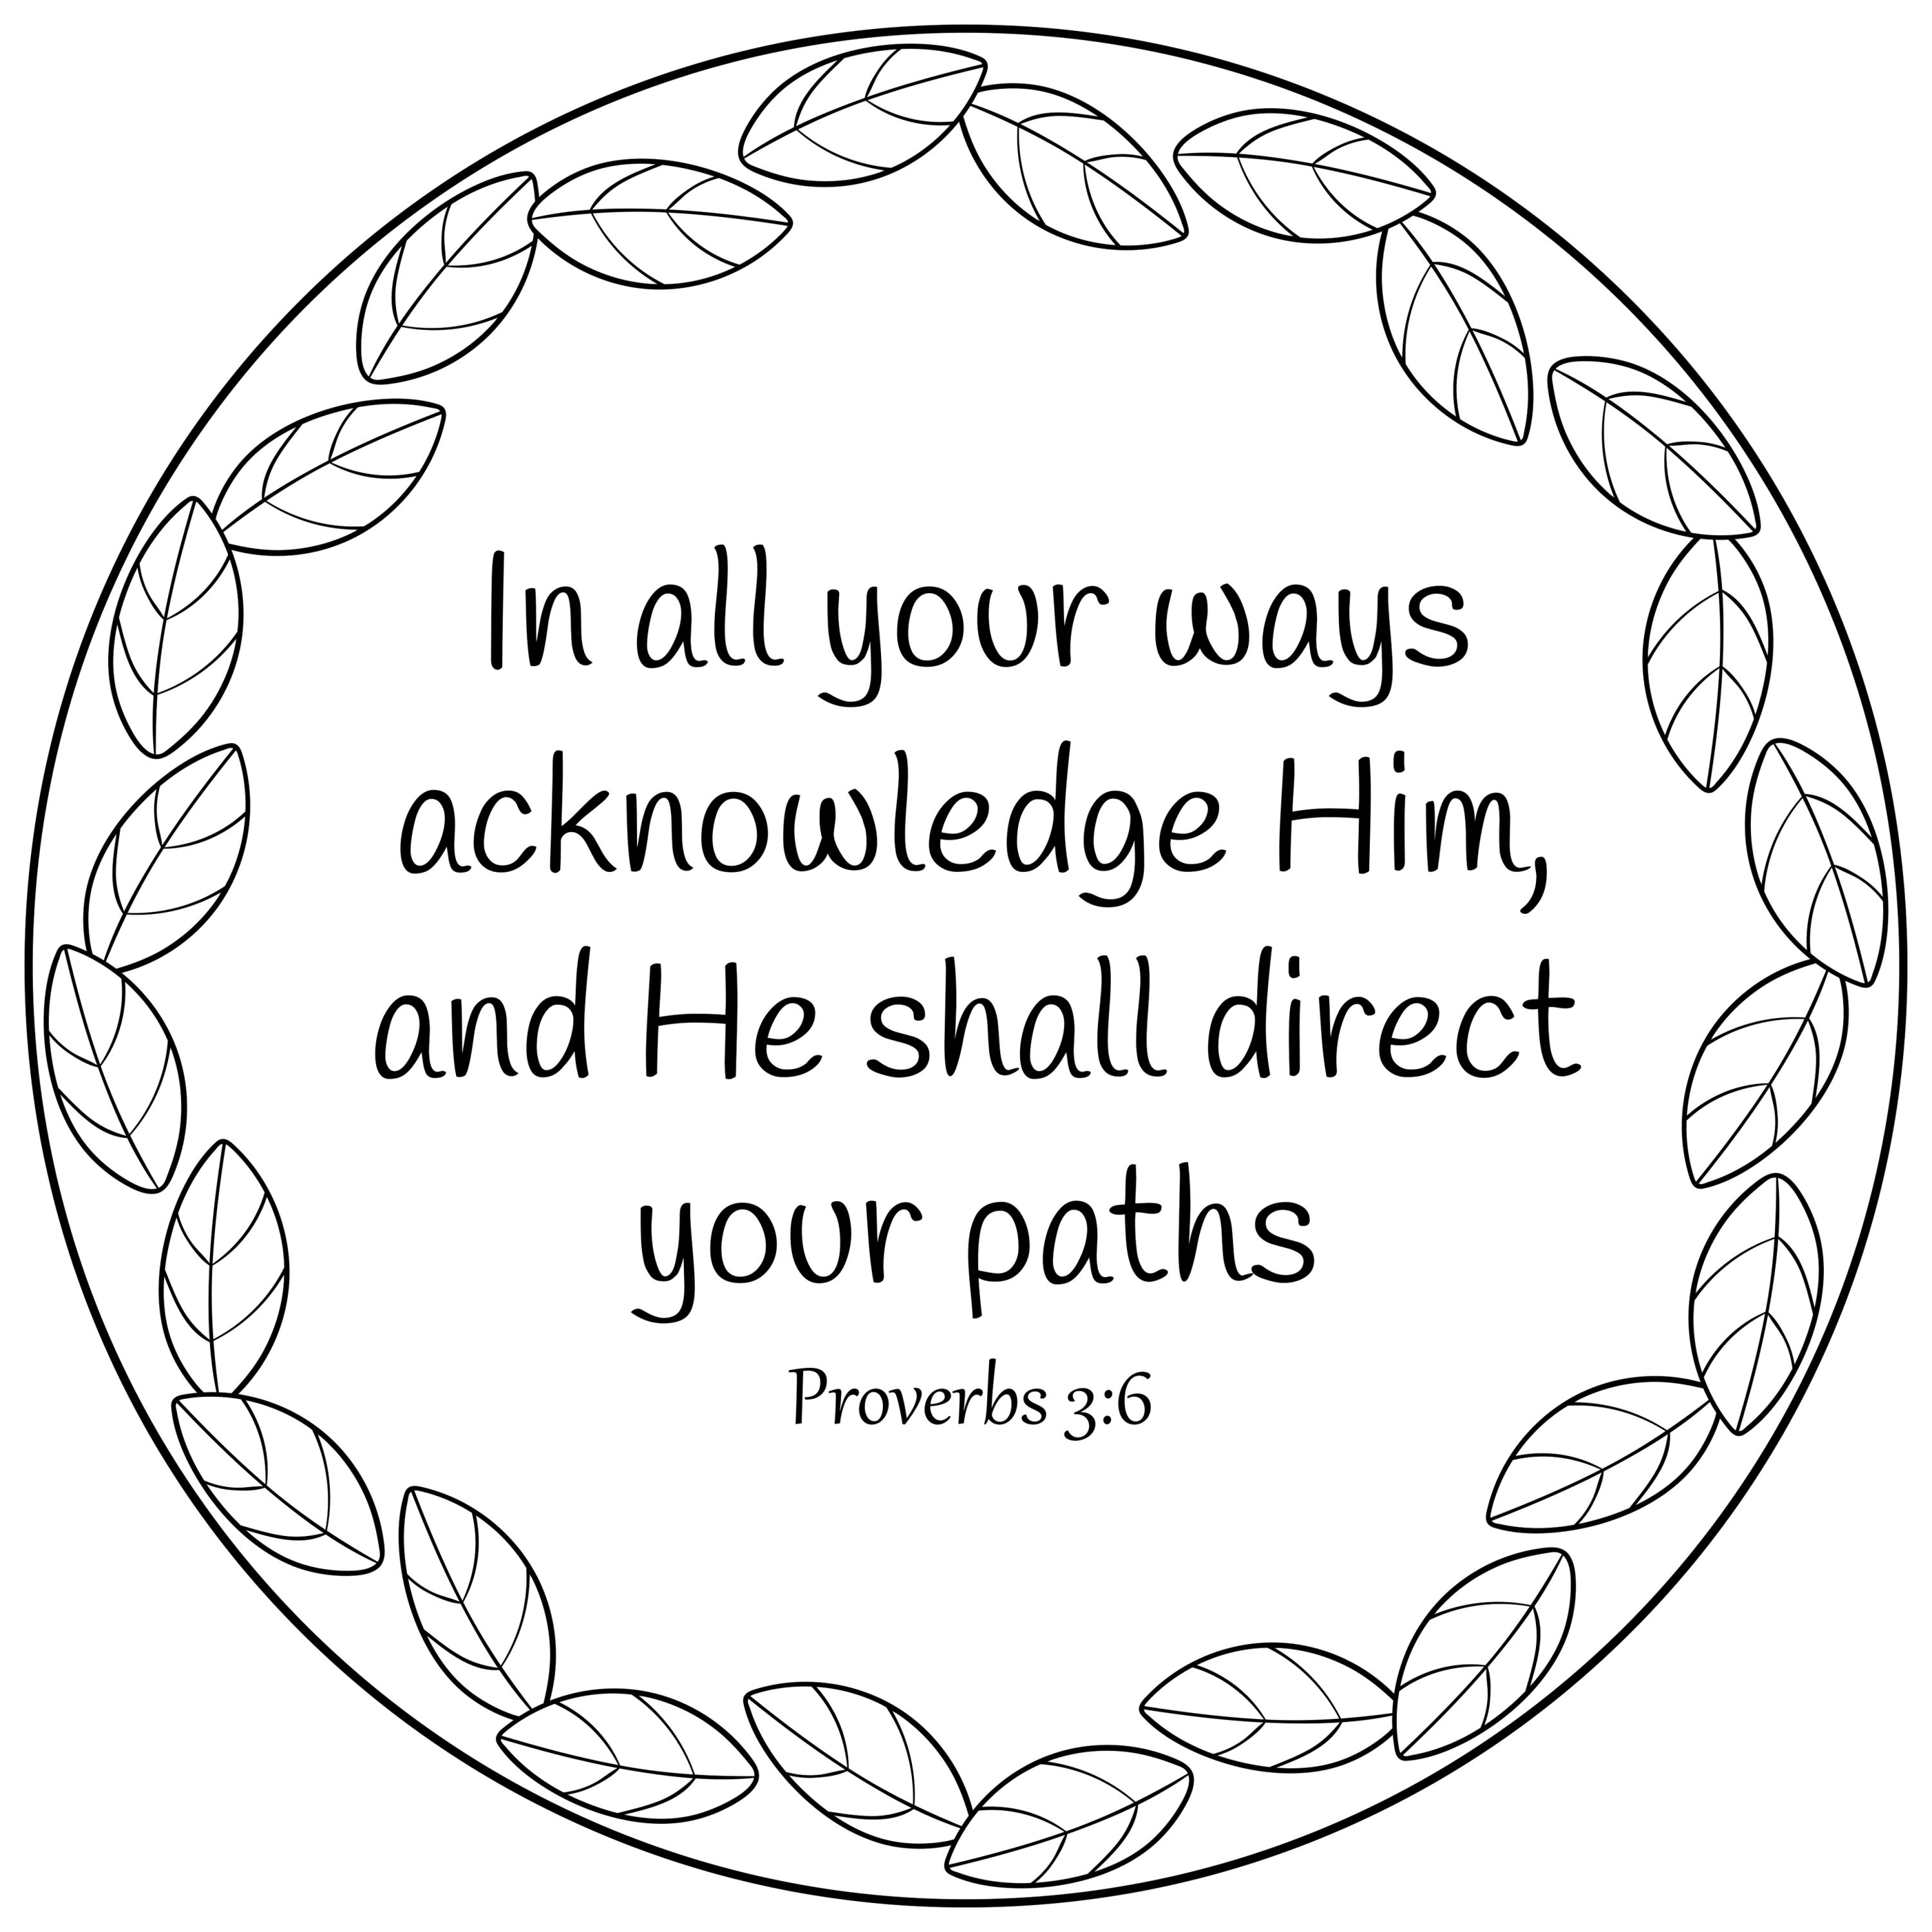 Black on transparent biblical circle coloring page with Proverbs 3:6 text. Home decor, christian holidays activity, for children and adults